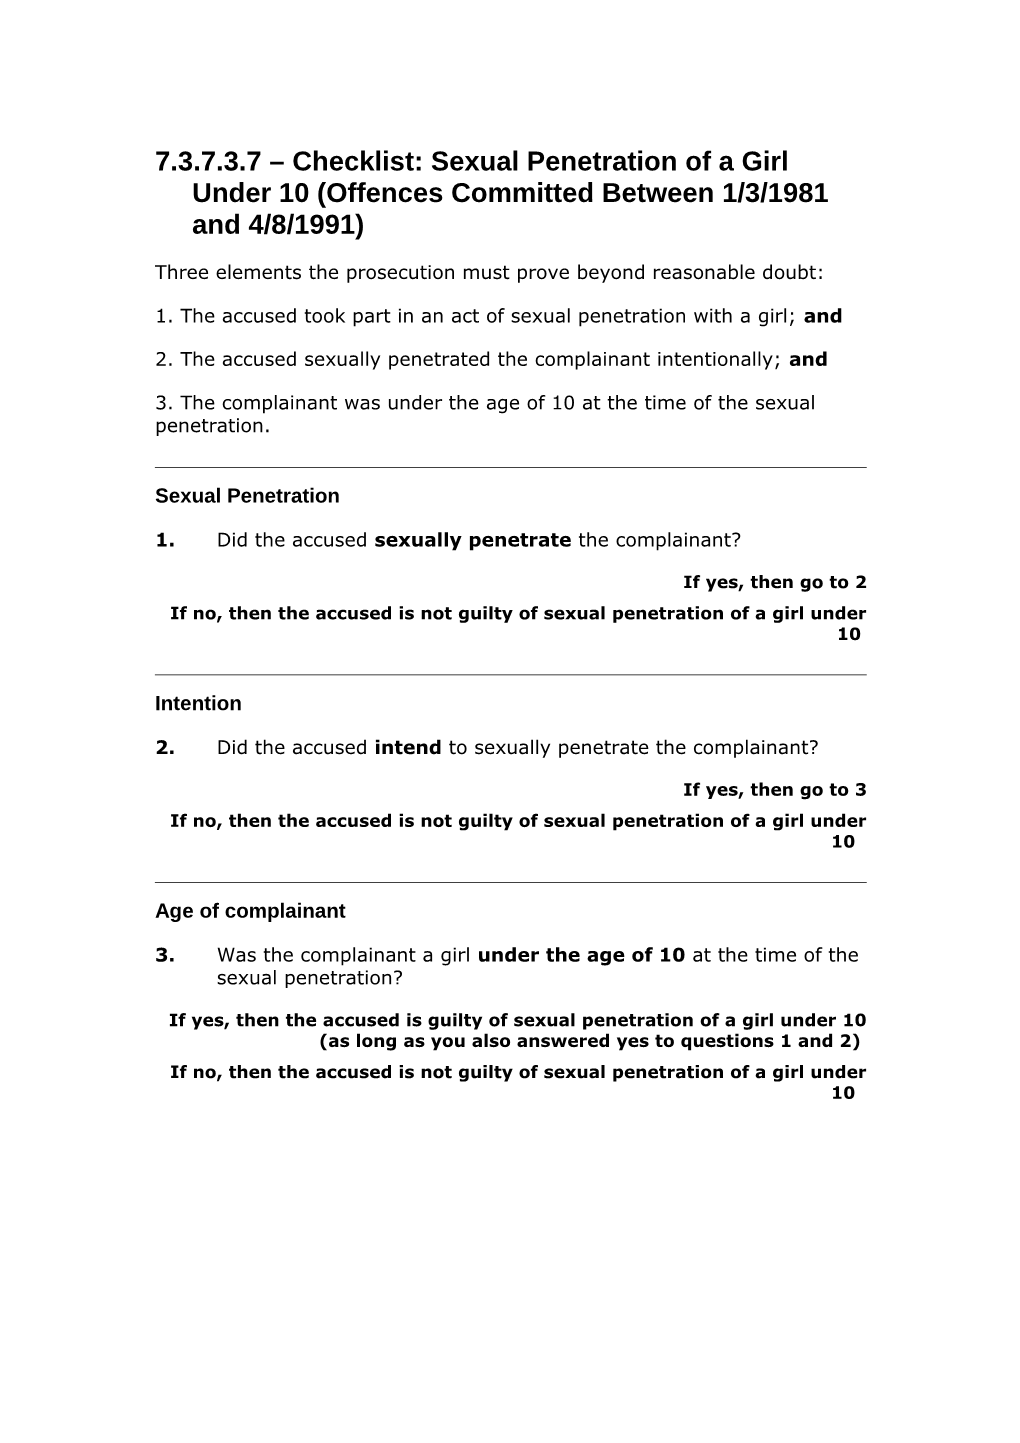 7.3.7.3.7 Checklist: Sexual Penetration of a Girl Under 10 (Offences Committed Between